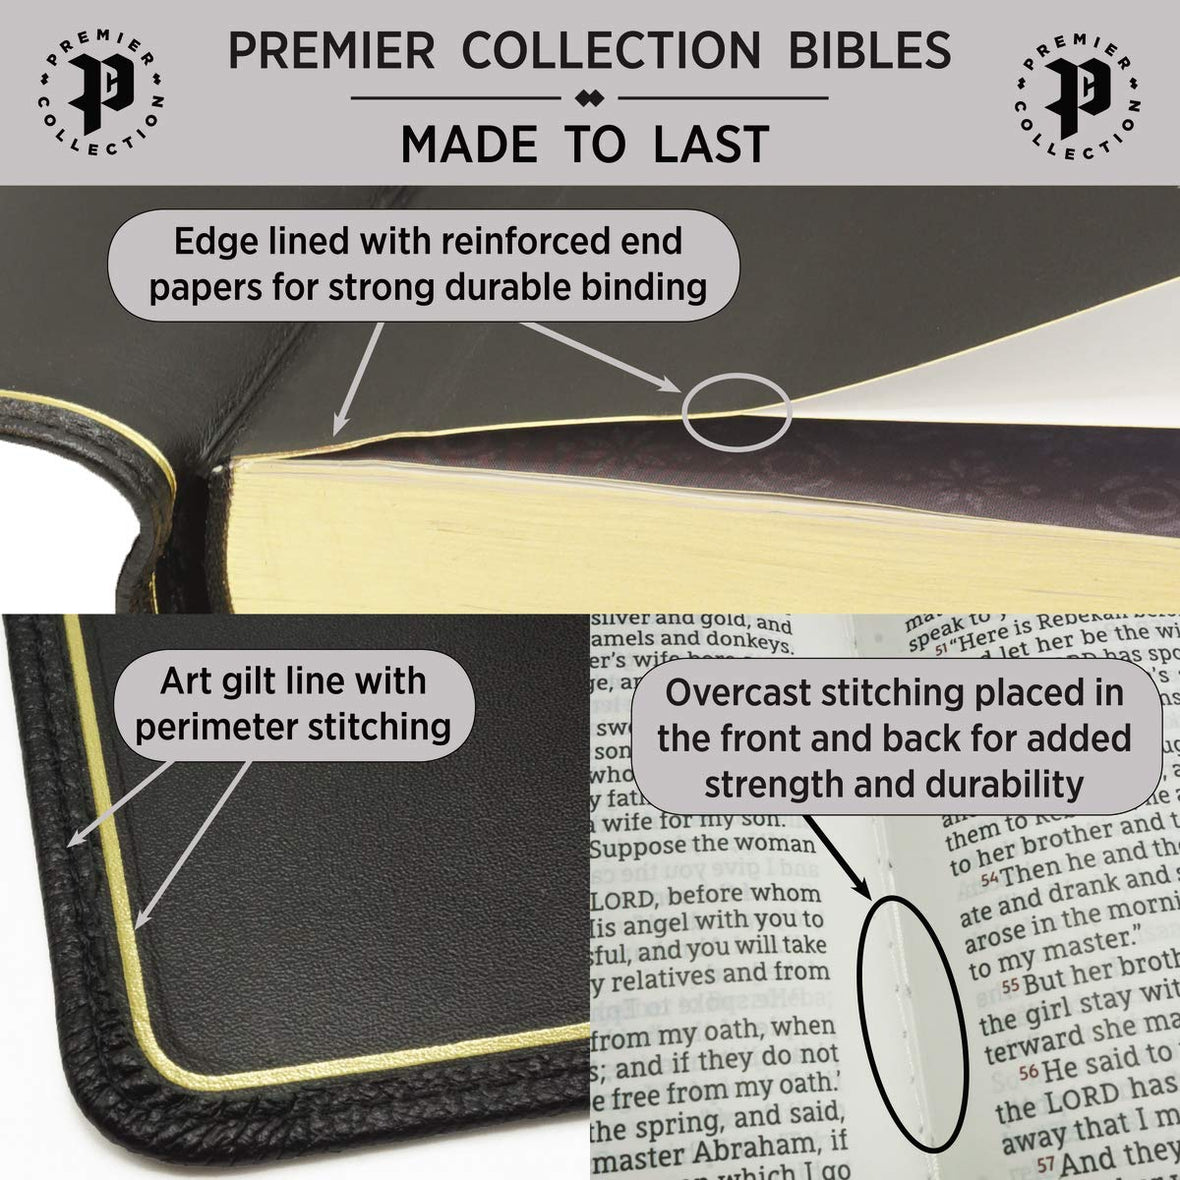 NIV, Wide Margin Bible (A Bible that Welcomes Note-Taking), Premium Goatskin Leather, Black, Premier Collection, Red Letter, Art Gilded Edges, Comfort Print